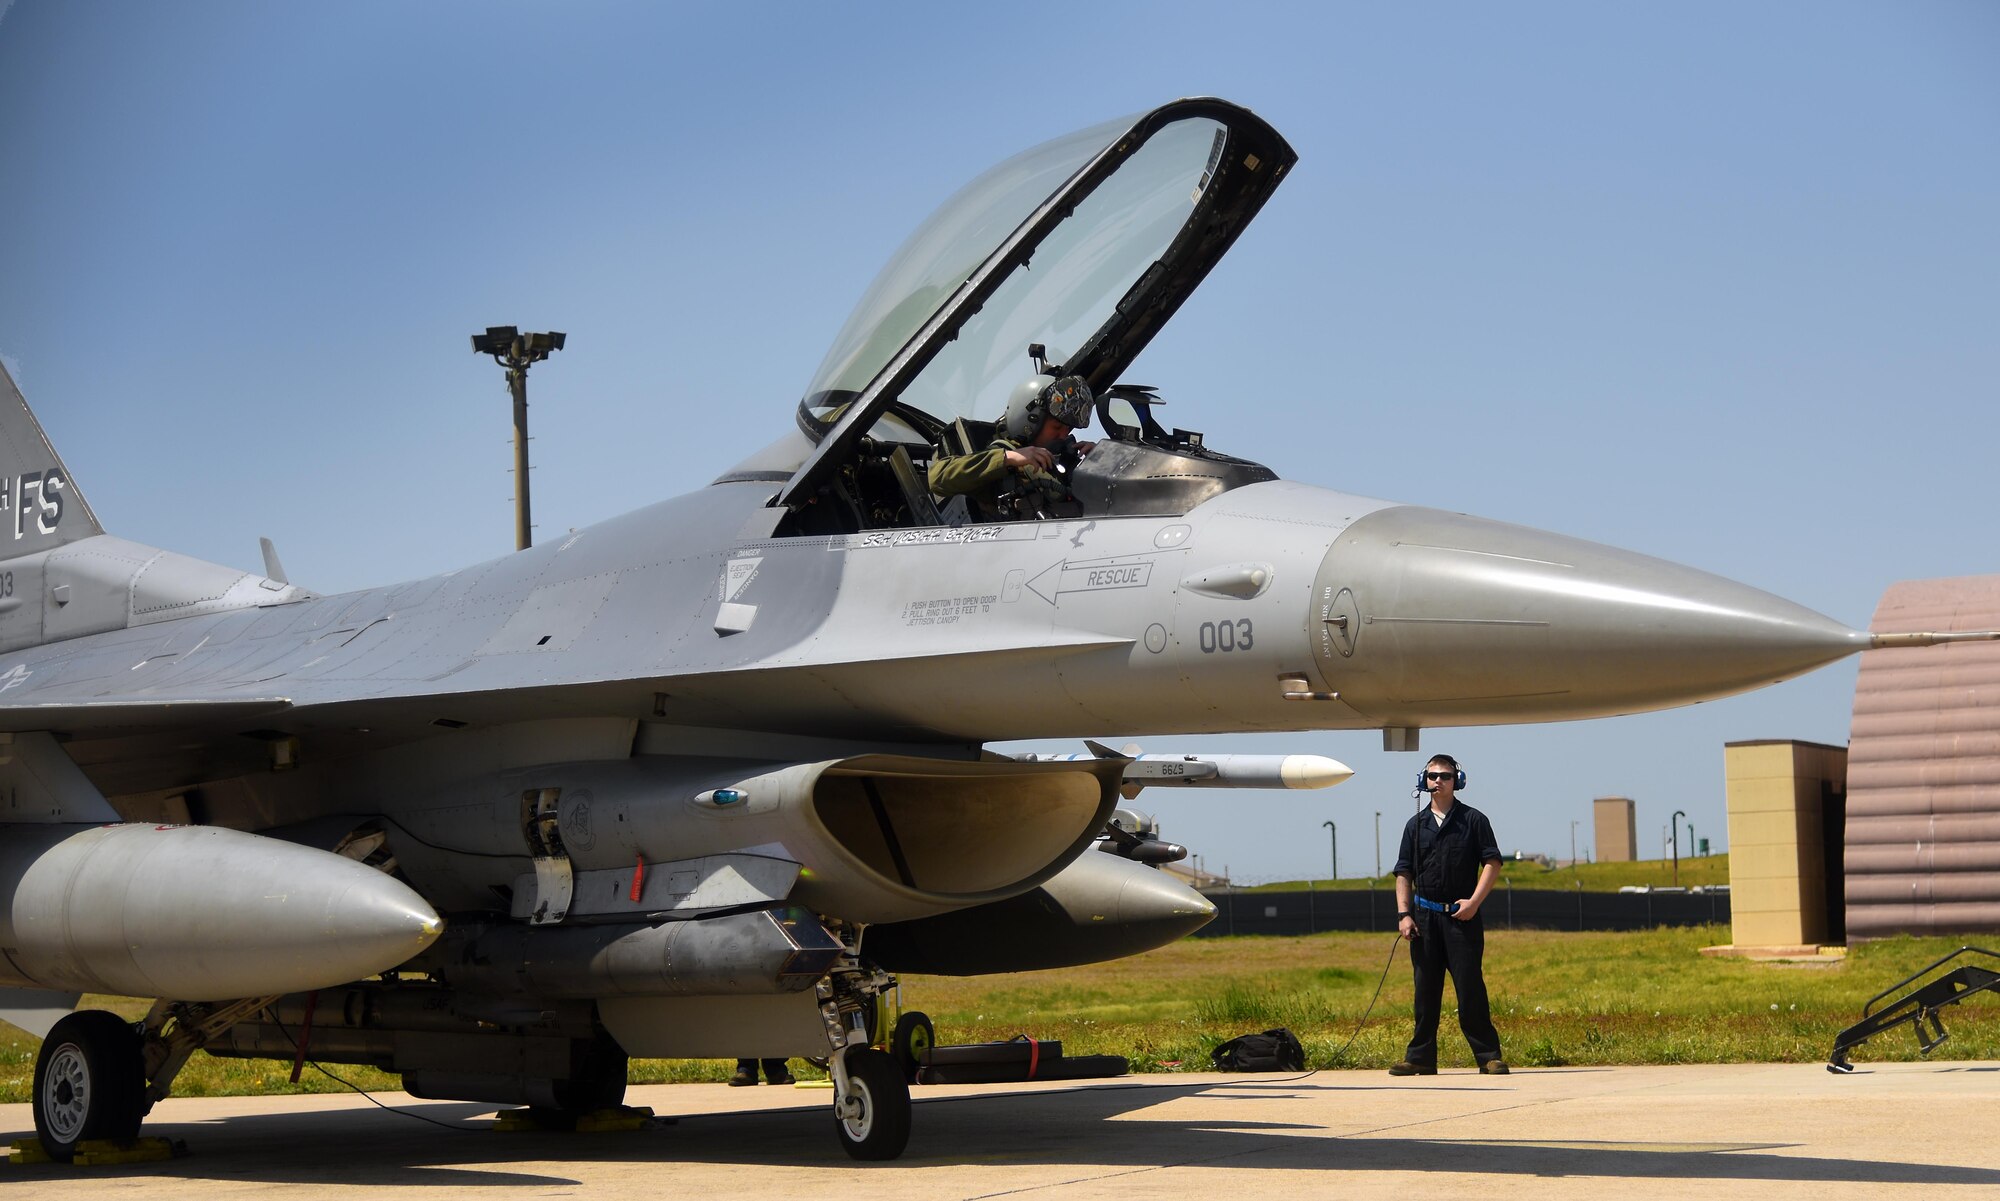 U.S. Air Force 1st Lt. Glenn Miltenberg, 35th Fighter Squadron pilot, and Airman 1st Class Austin Willey, 8th Aircraft Maintenance Squadron crew chief, conduct a communications check during Exercise MAX THUNDER 17 at Kunsan Air Base, Republic of Korea, April 27, 2017. Max Thunder is part of a continuous exercise program to enhance interoperability between U.S. and ROK forces. (U.S. Air Force photo by Tech. Sgt. Jeff Andrejcik/Released)